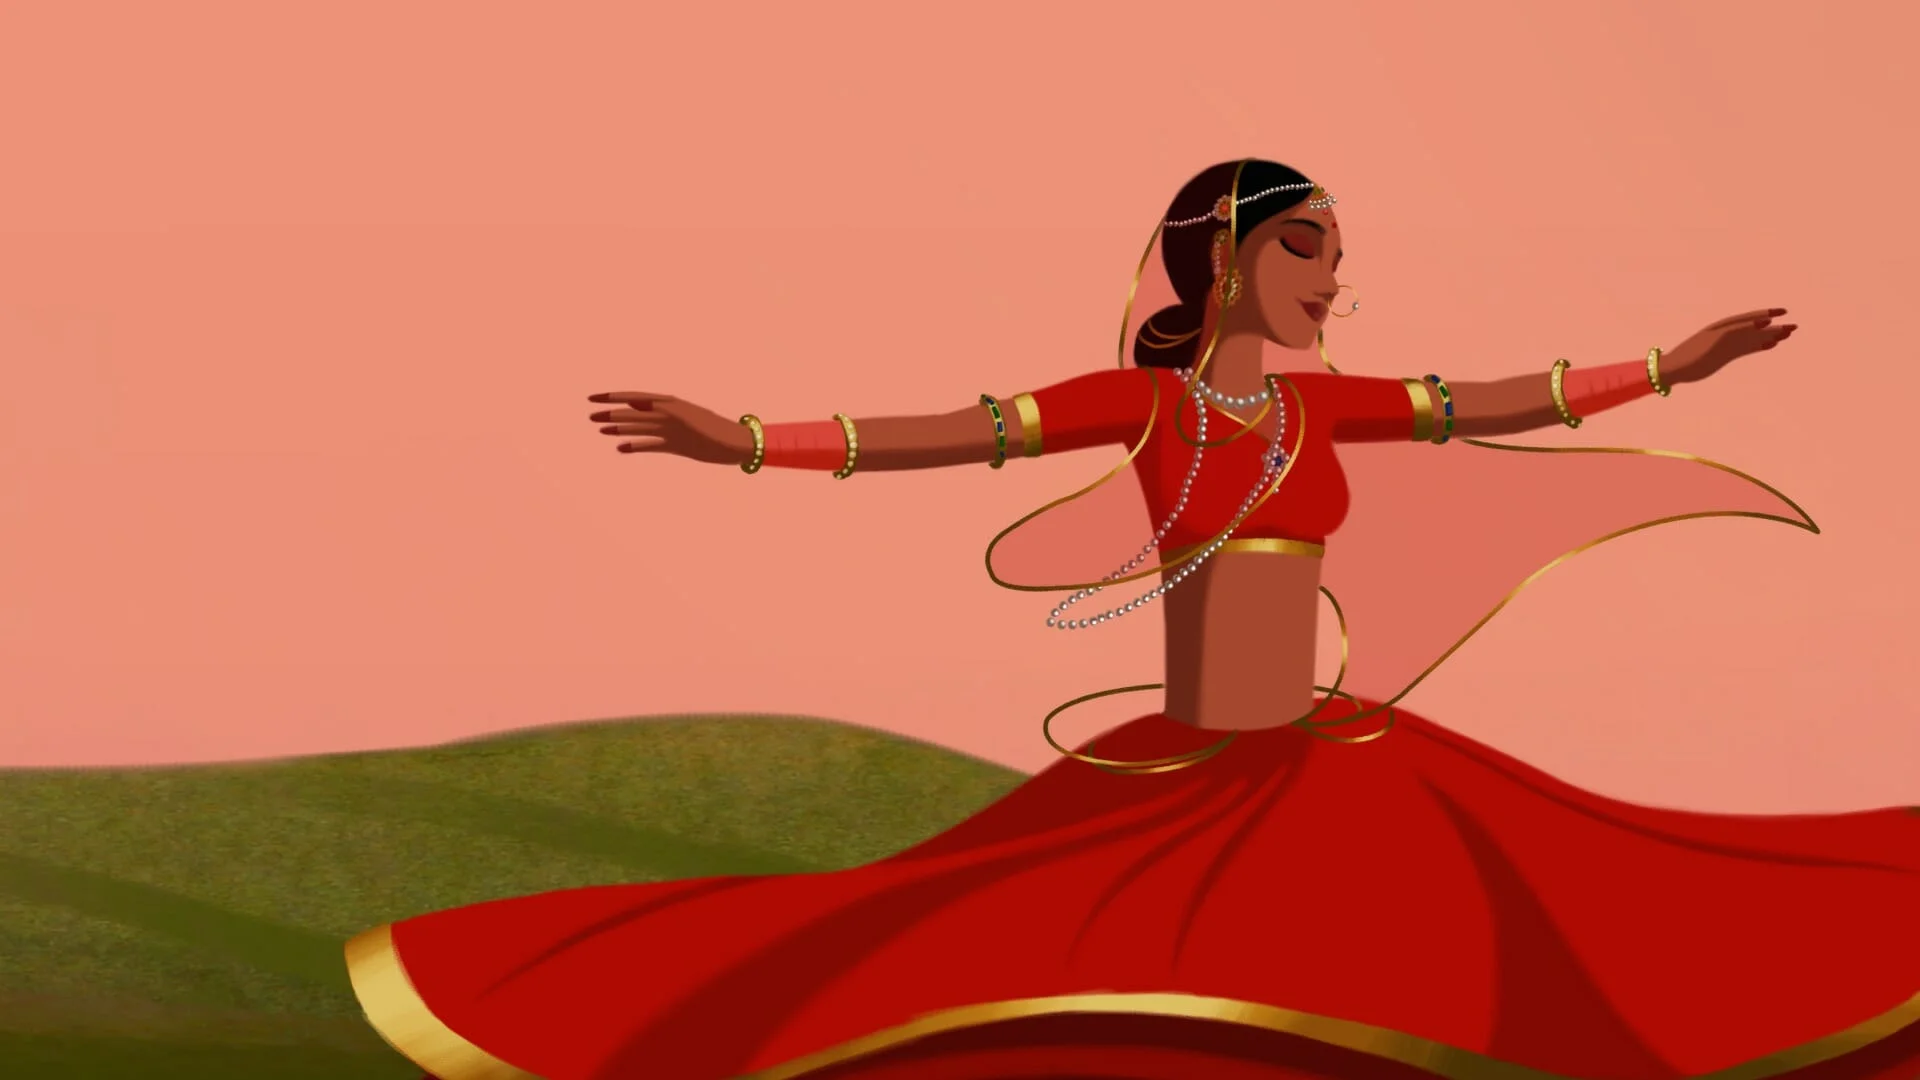 Bombay Rose has a unique visual animation style